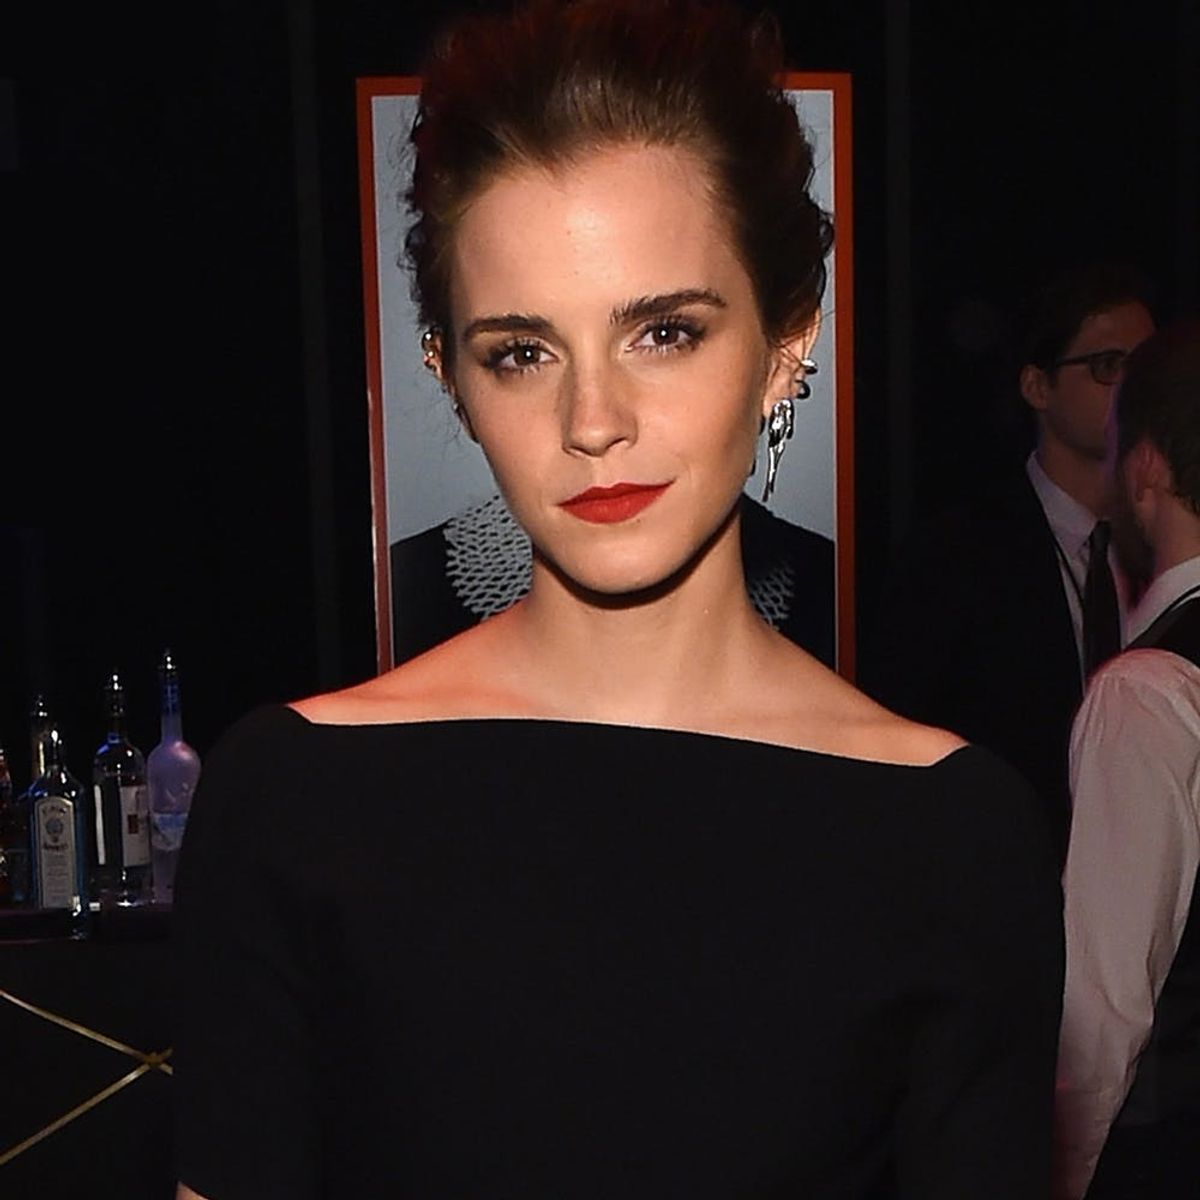 Here’s Your First Look at Emma Watson As Beauty and the Beast’s Belle